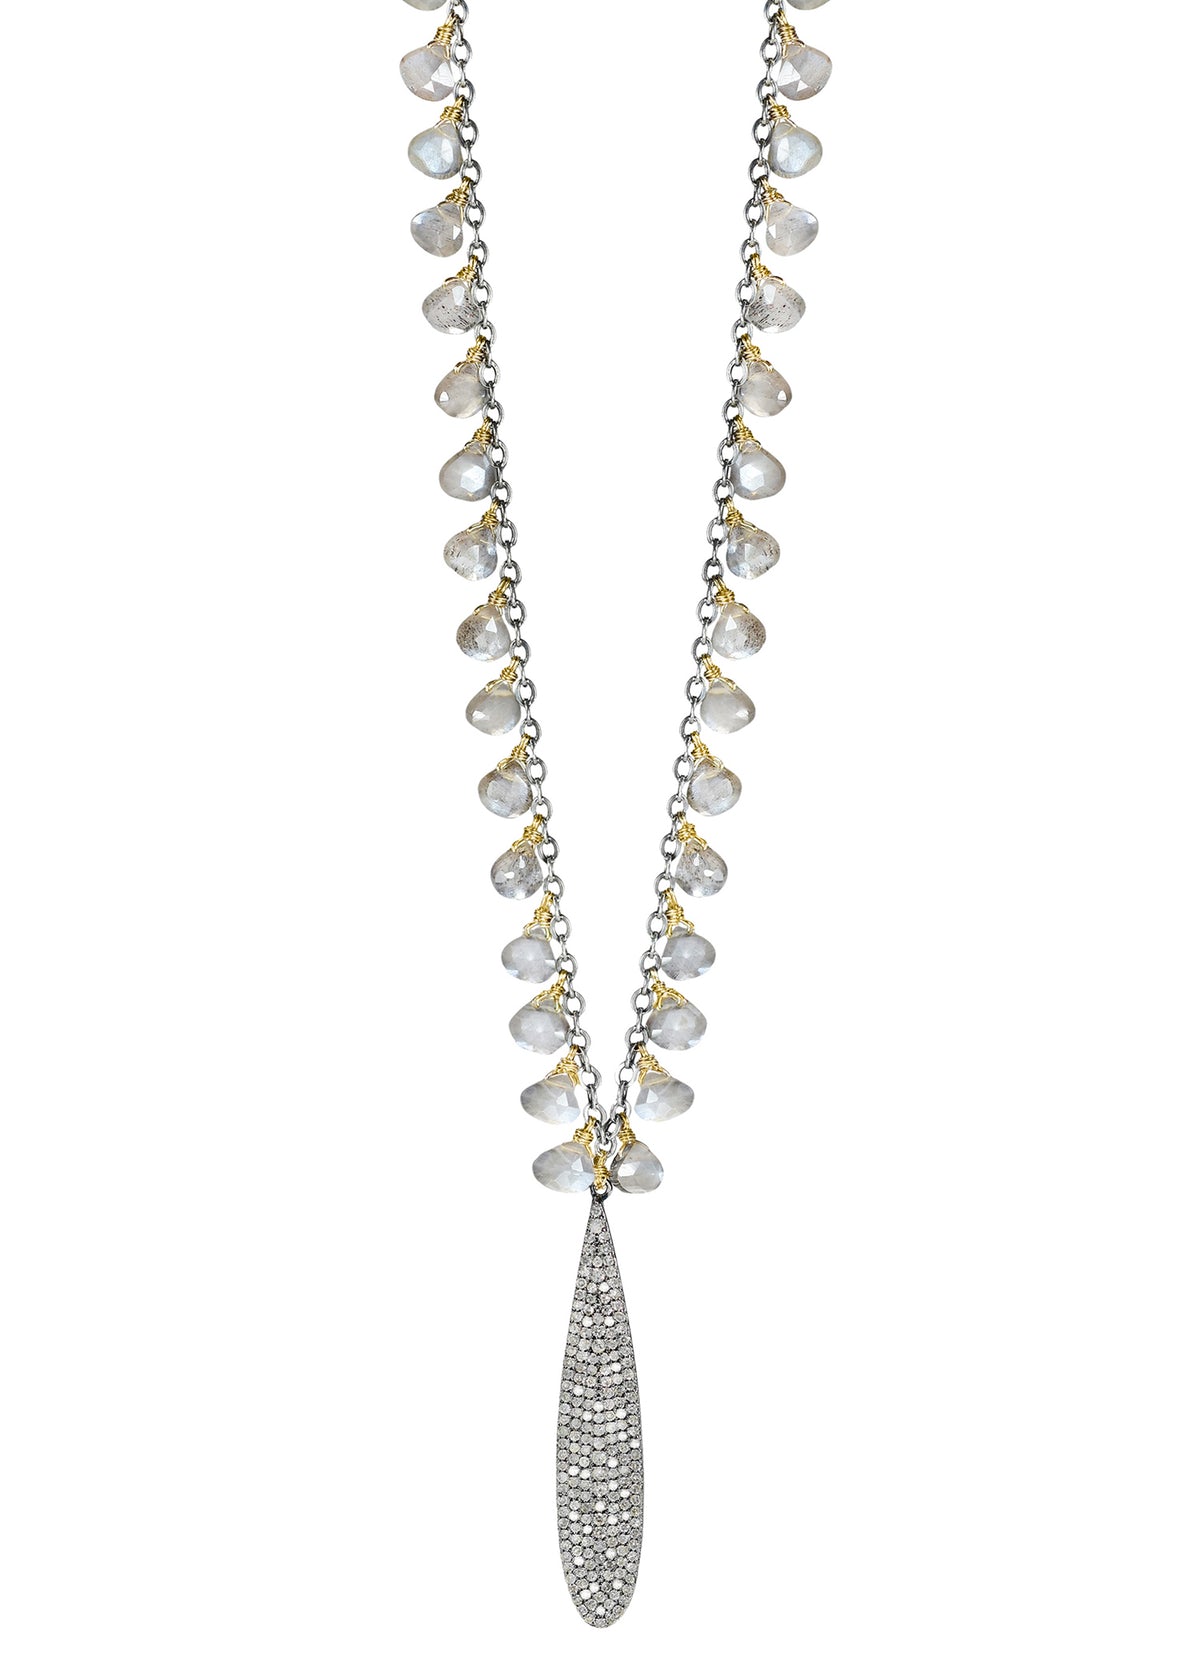 Diamond Gray moonstone 14k gold Sterling silver Mixed metal Special order only Necklace measures 21&quot; in length Moonstone measures 3/16&quot; in length and 3/16&quot; in width at the widest point Pave pendant measures 1-5/8&quot; in length and 5/16&quot; in width Handmade in our Los Angeles studio 